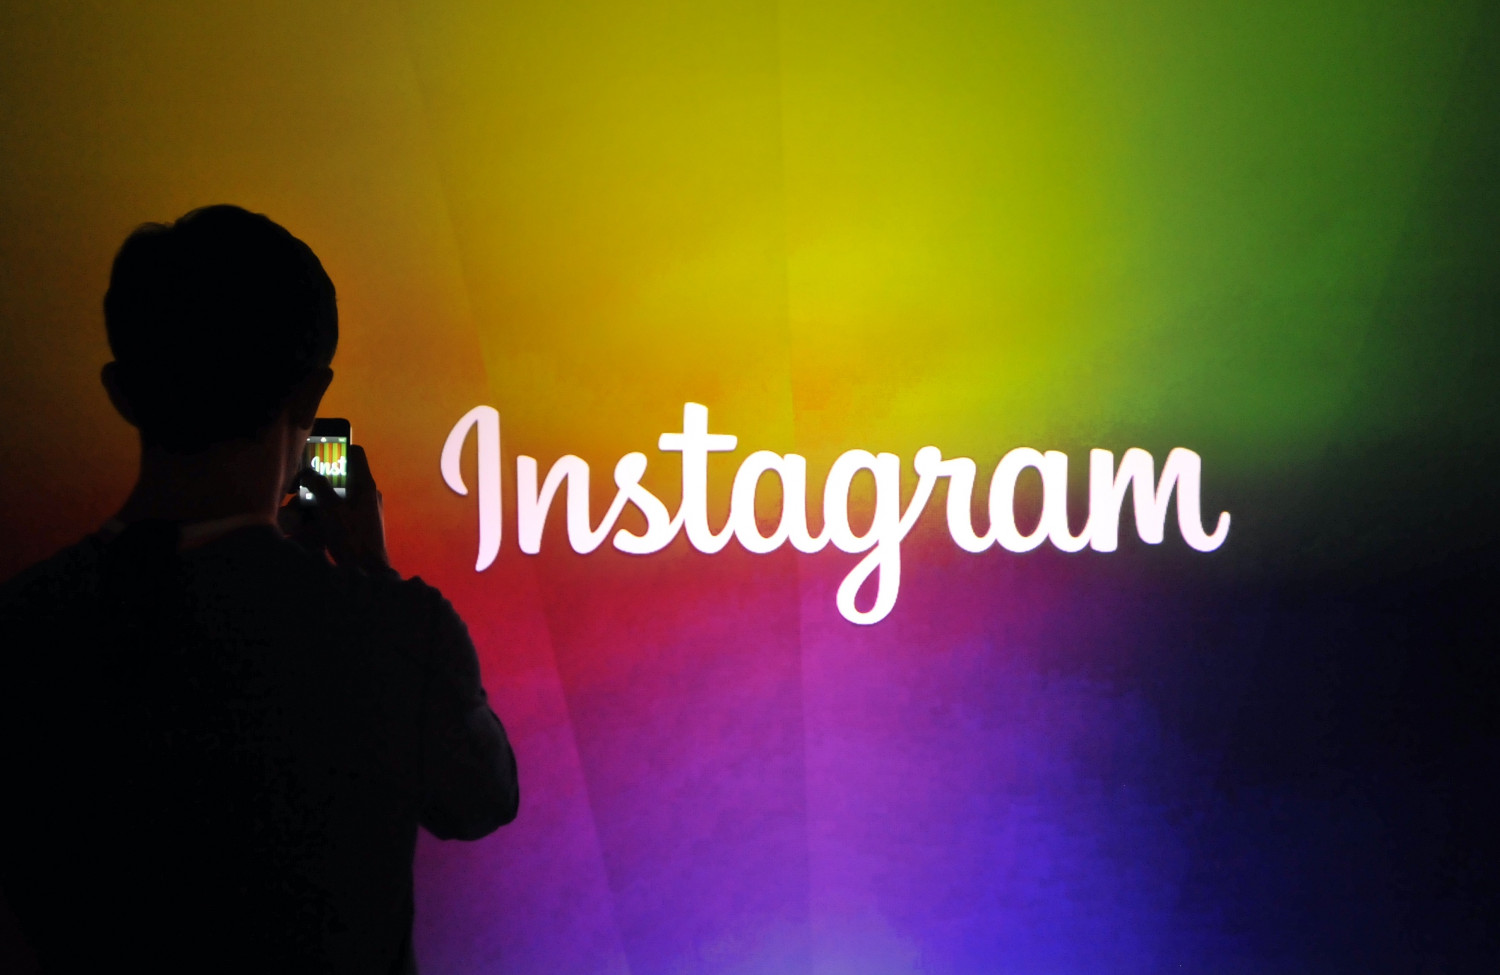 Instagram Gets Into E-Commerce Business With Checkout Tool